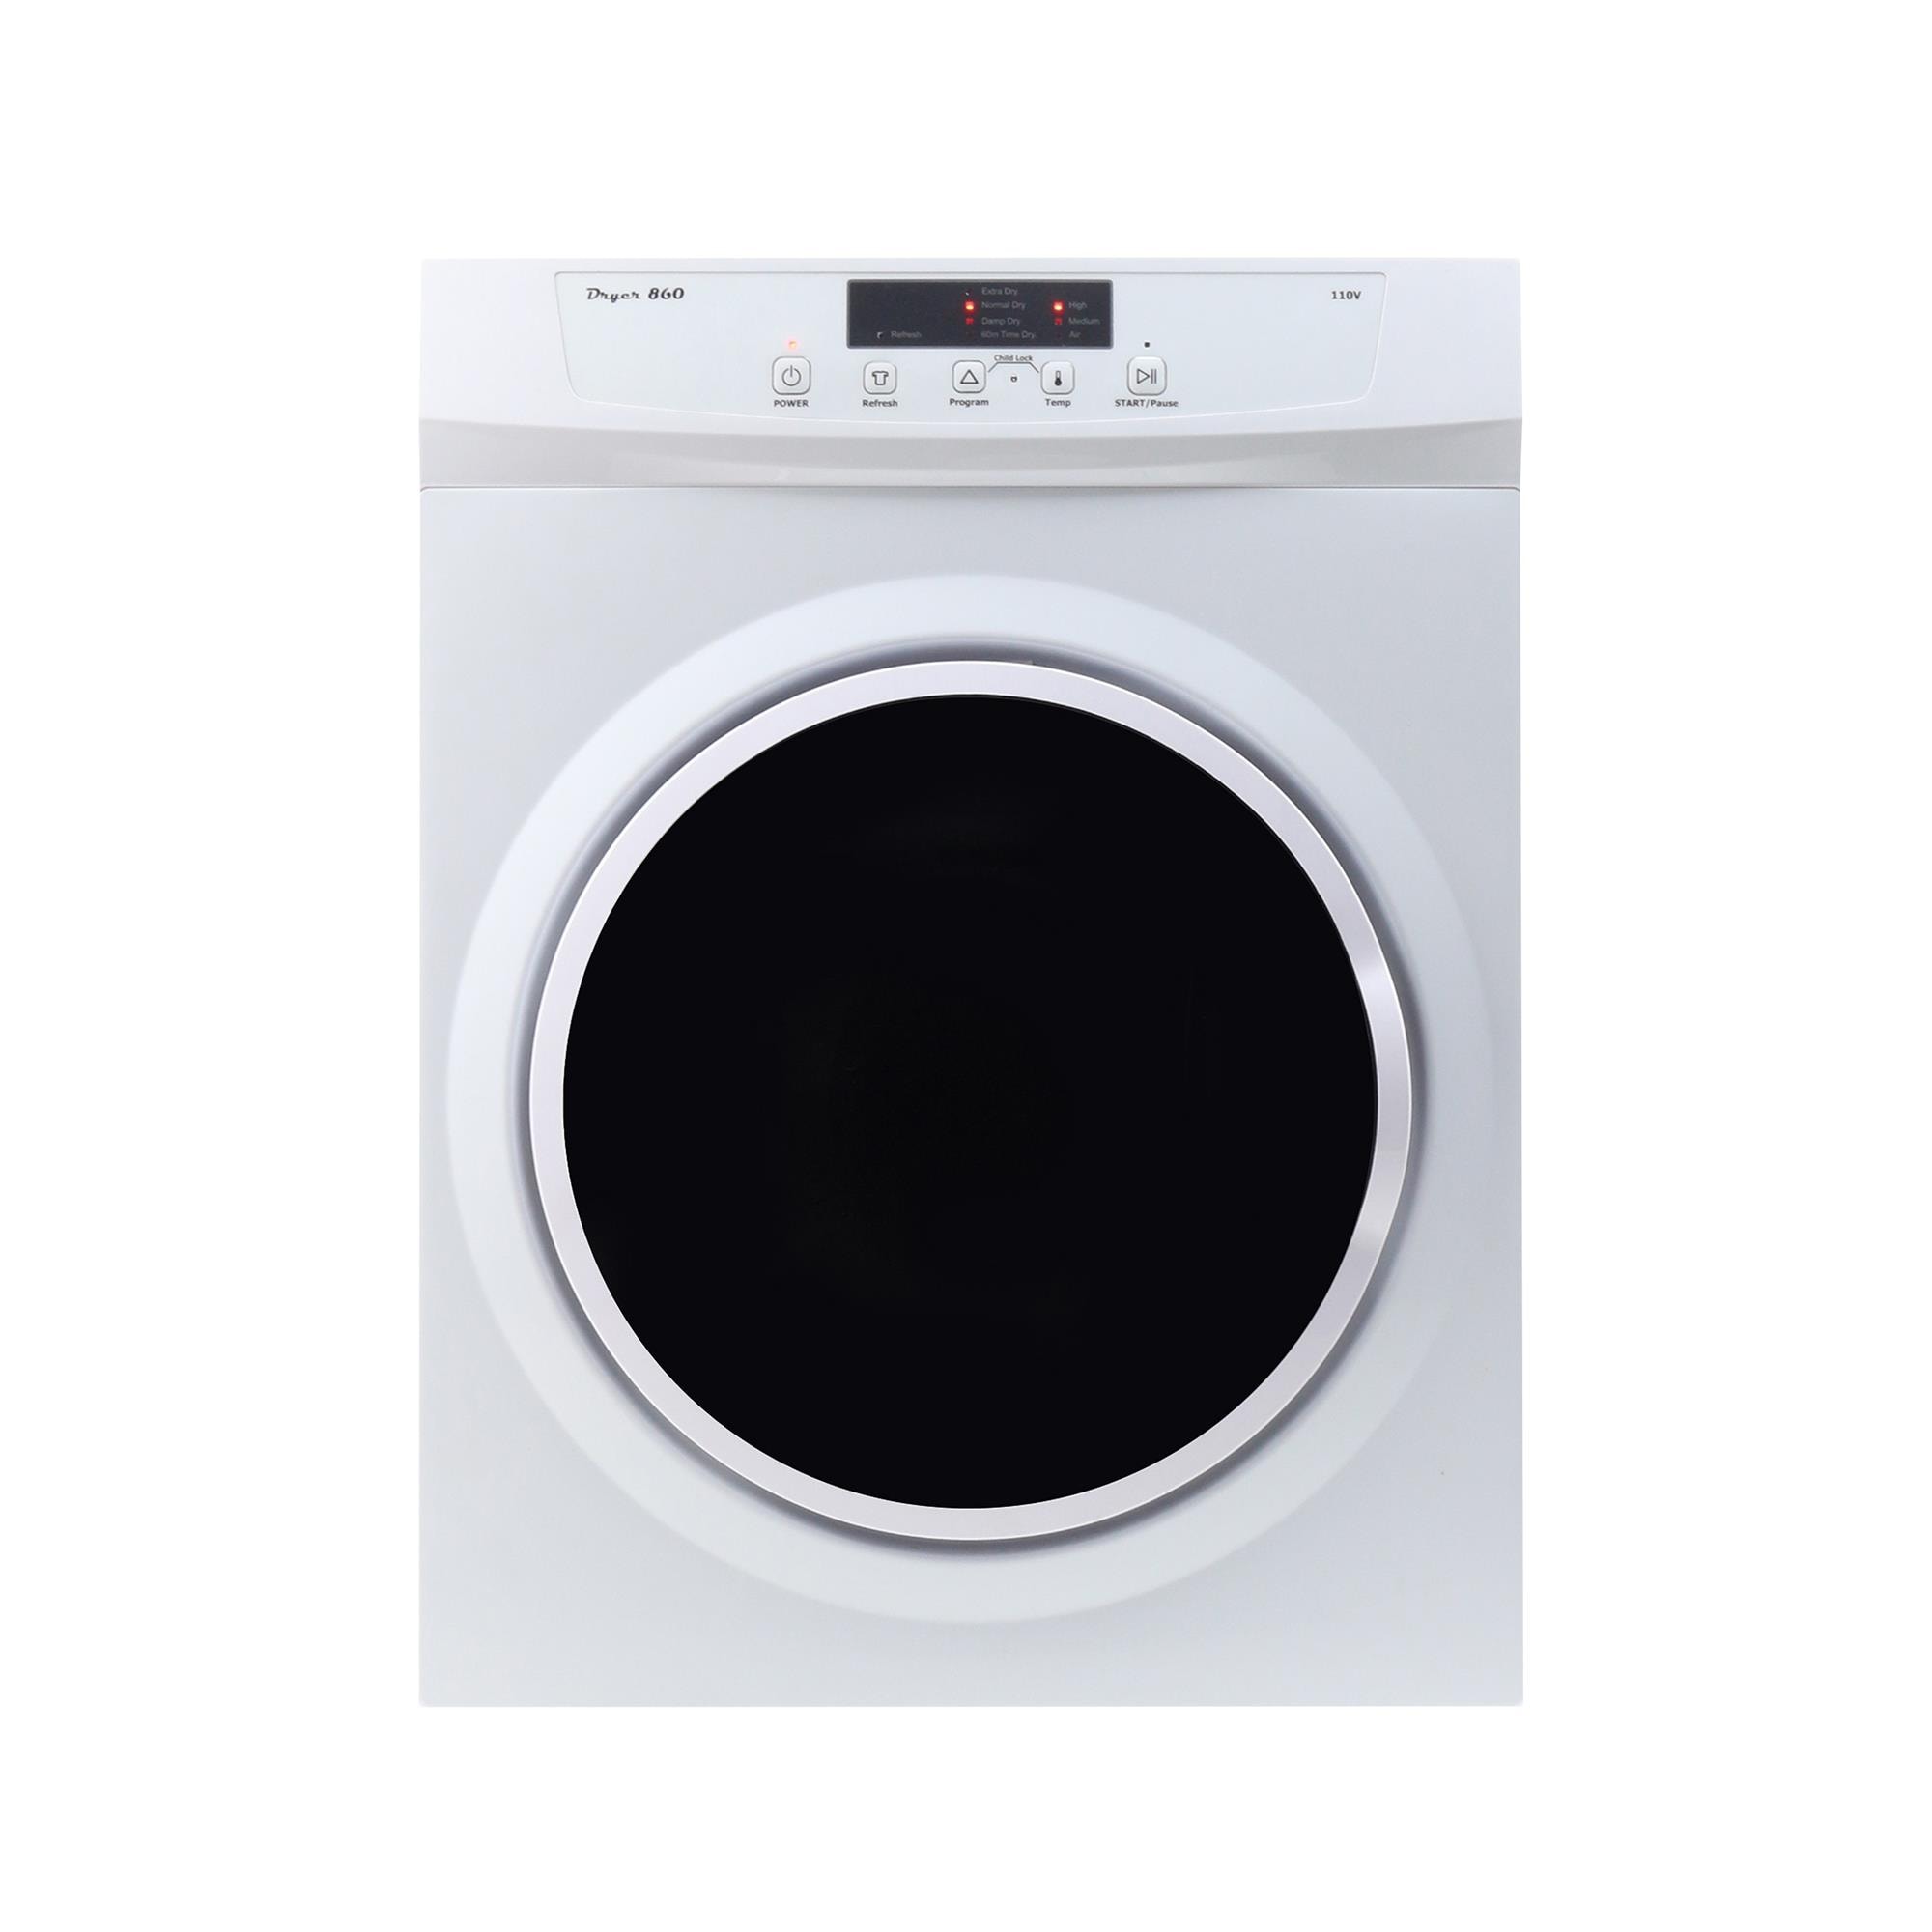  Magic Chef Compact Laundry Dryer Machine, Portable Dryer for  Small Spaces, 3.5 Cubic Feet, White : Appliances